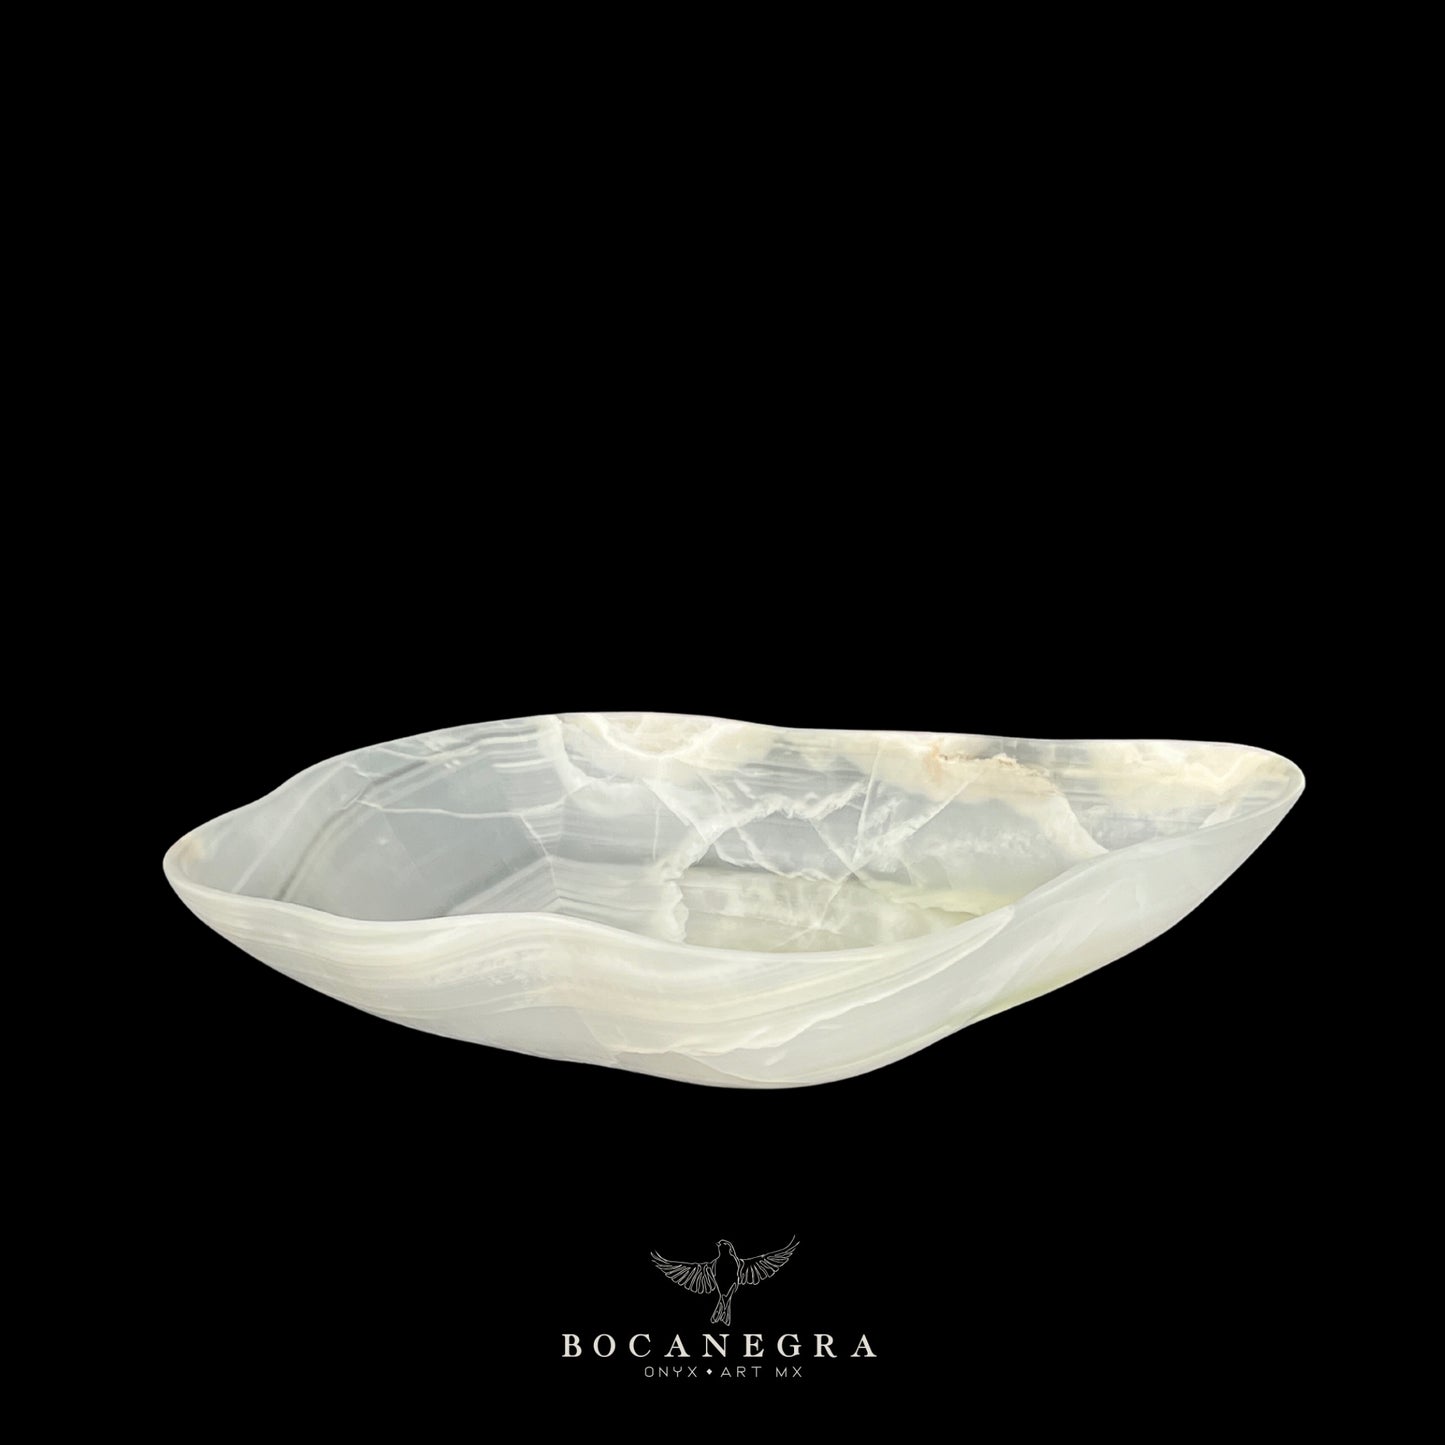 White Onyx Decorative Bowl - Centerpiece - Fruit Platter - Elegant Onyx Bowl - Handcrafted Beauty for Your Home